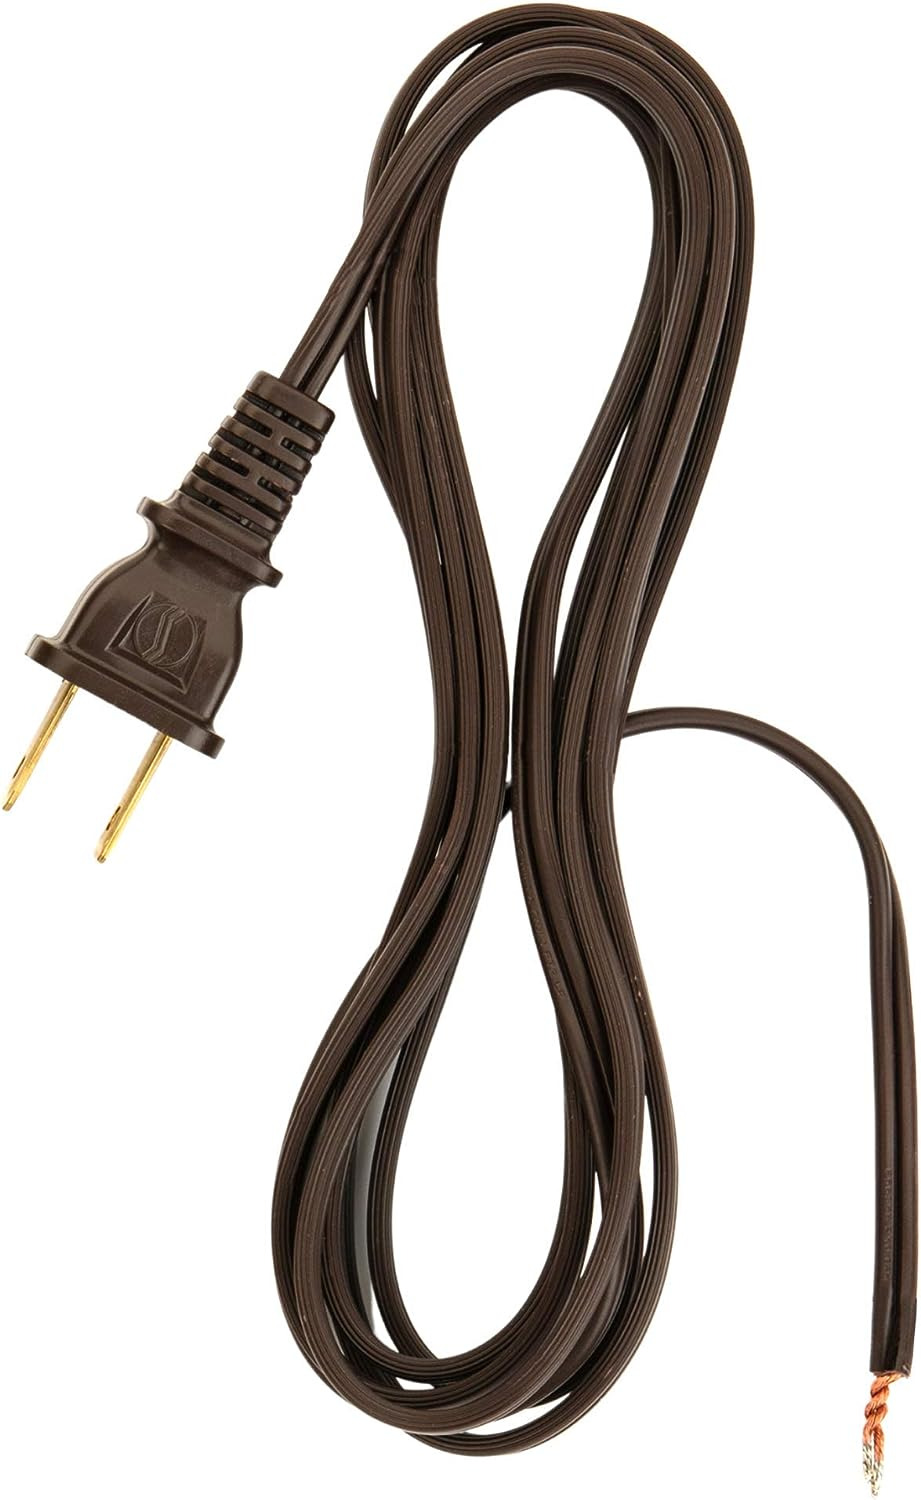 8 Ft Brown Lamp Cord, Vinyl Covered Replacement Electrical Wire, DIY Repair for 